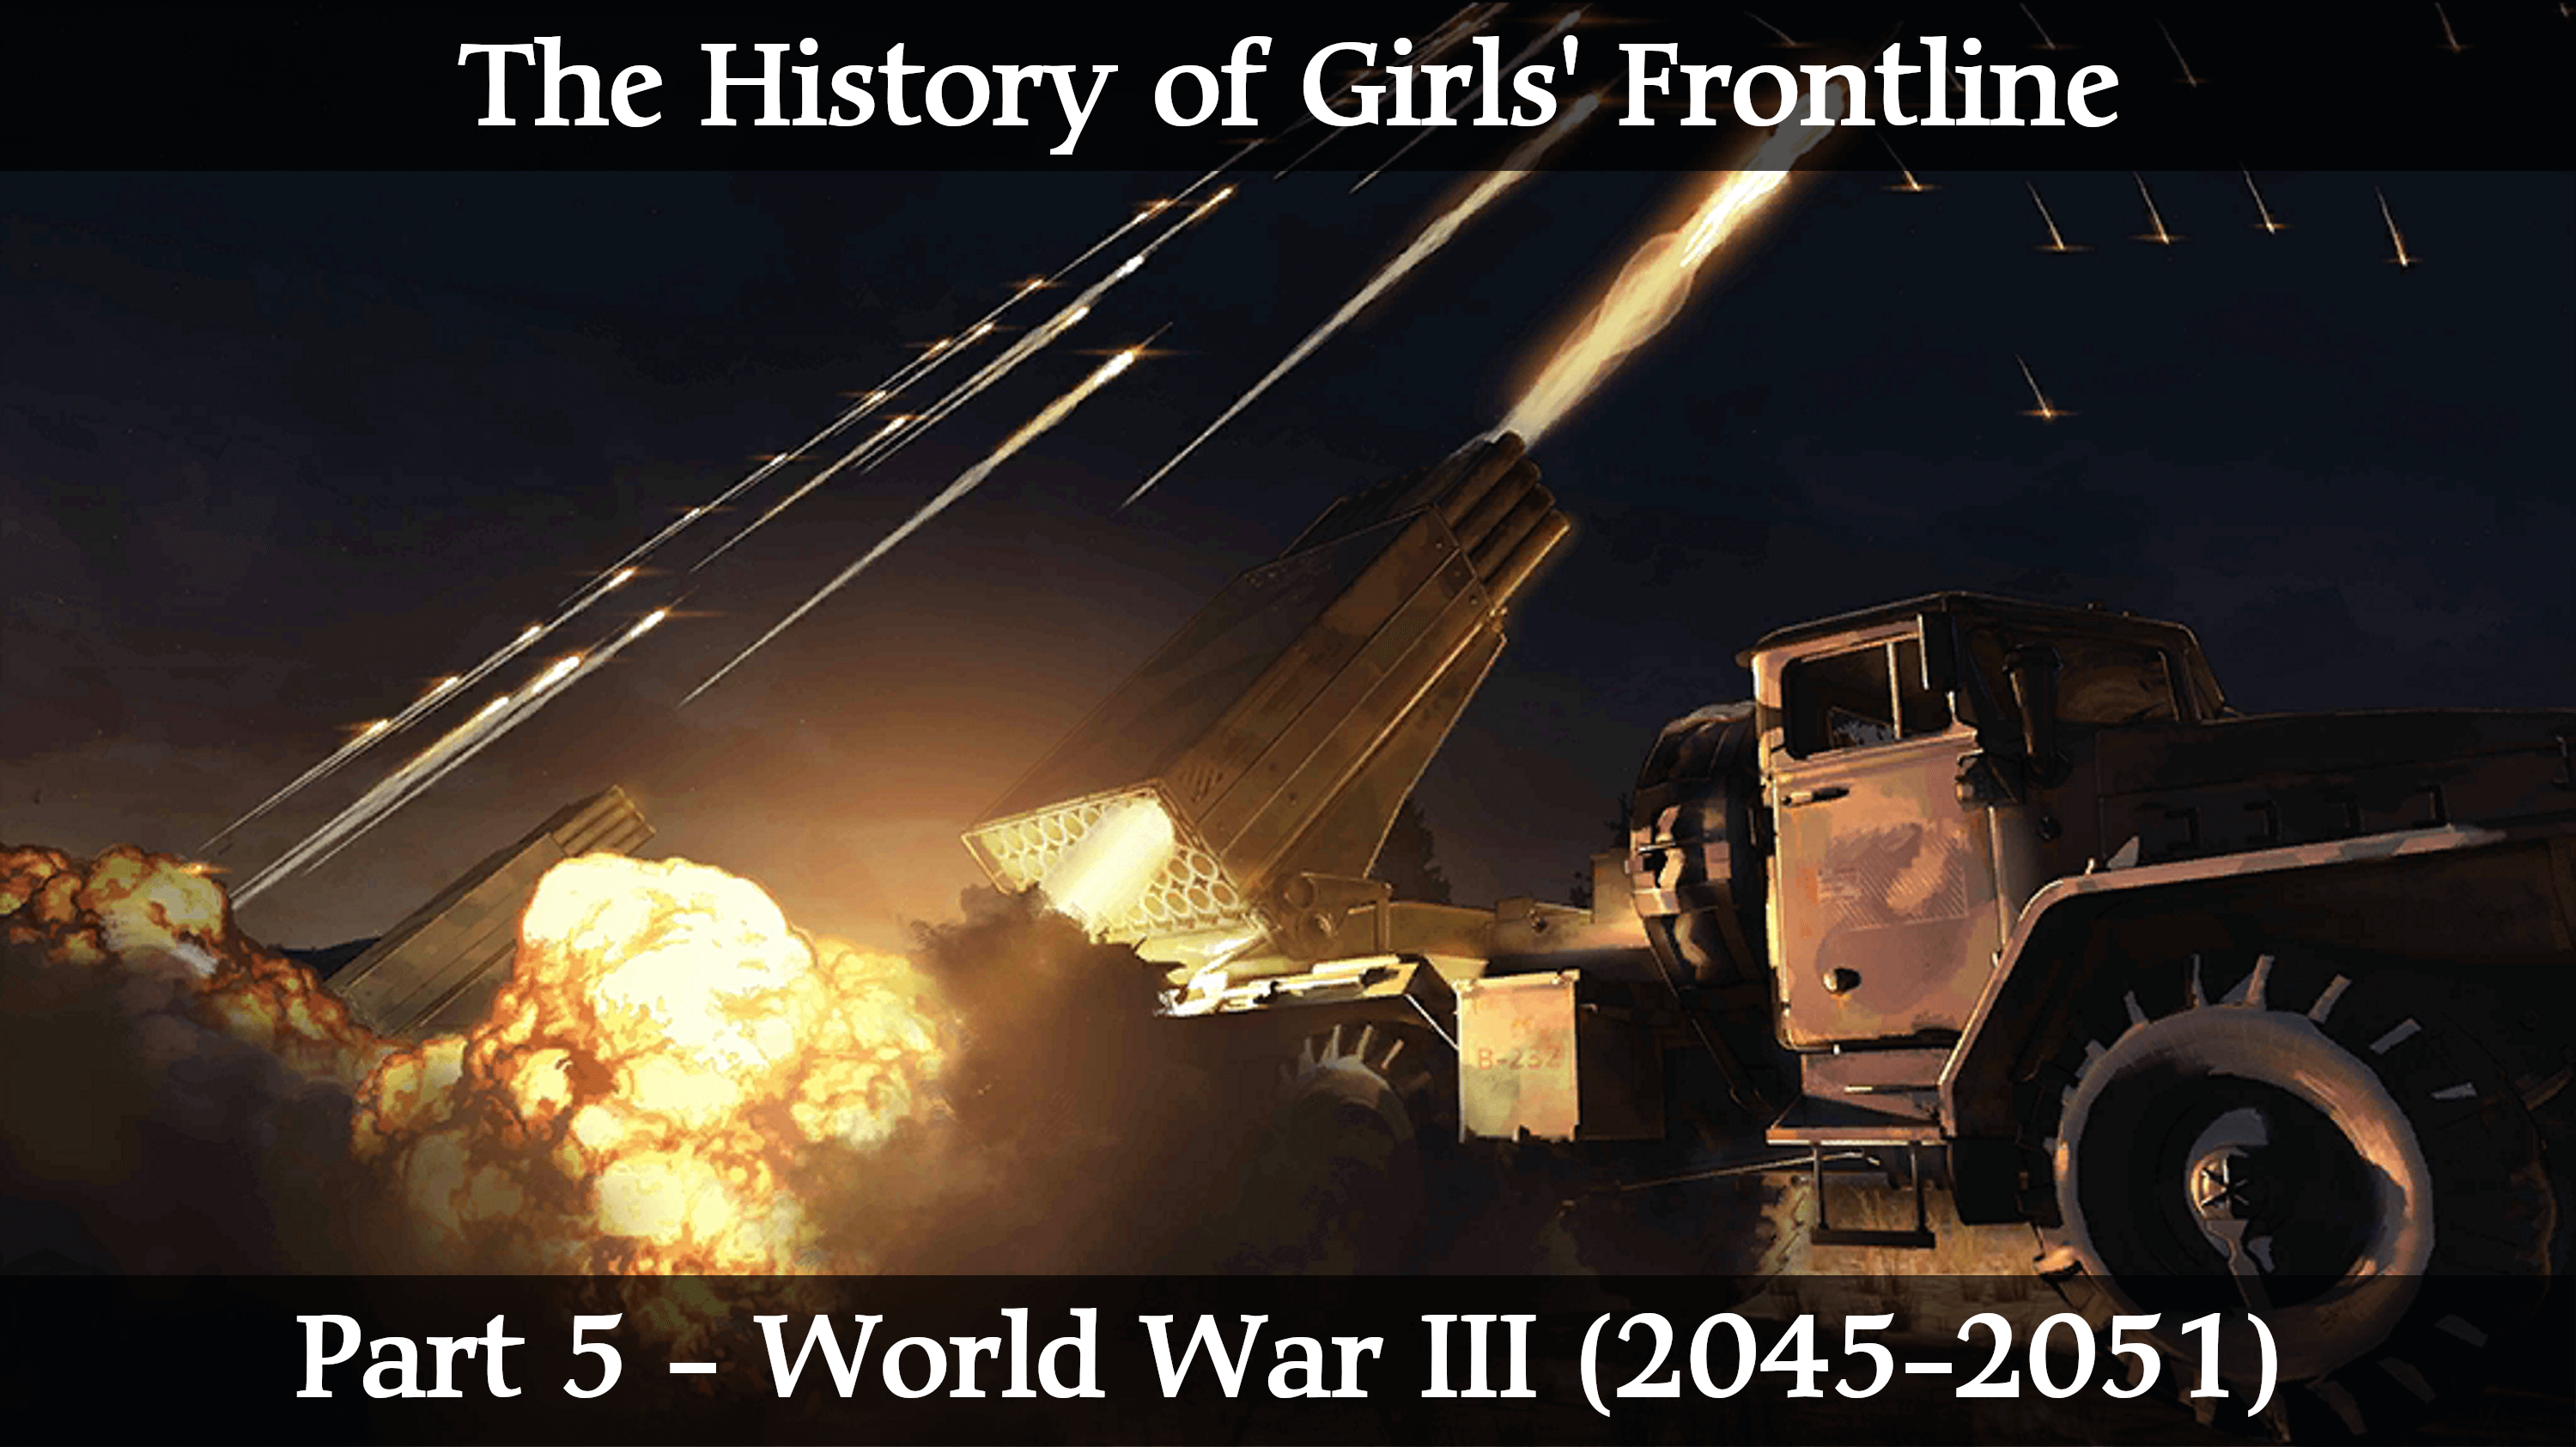 Part five of the complete history of Girls' Frontline and Reverse Collapse Code Name Bakery. Part five covers the Third World War from 2045 to 2051.